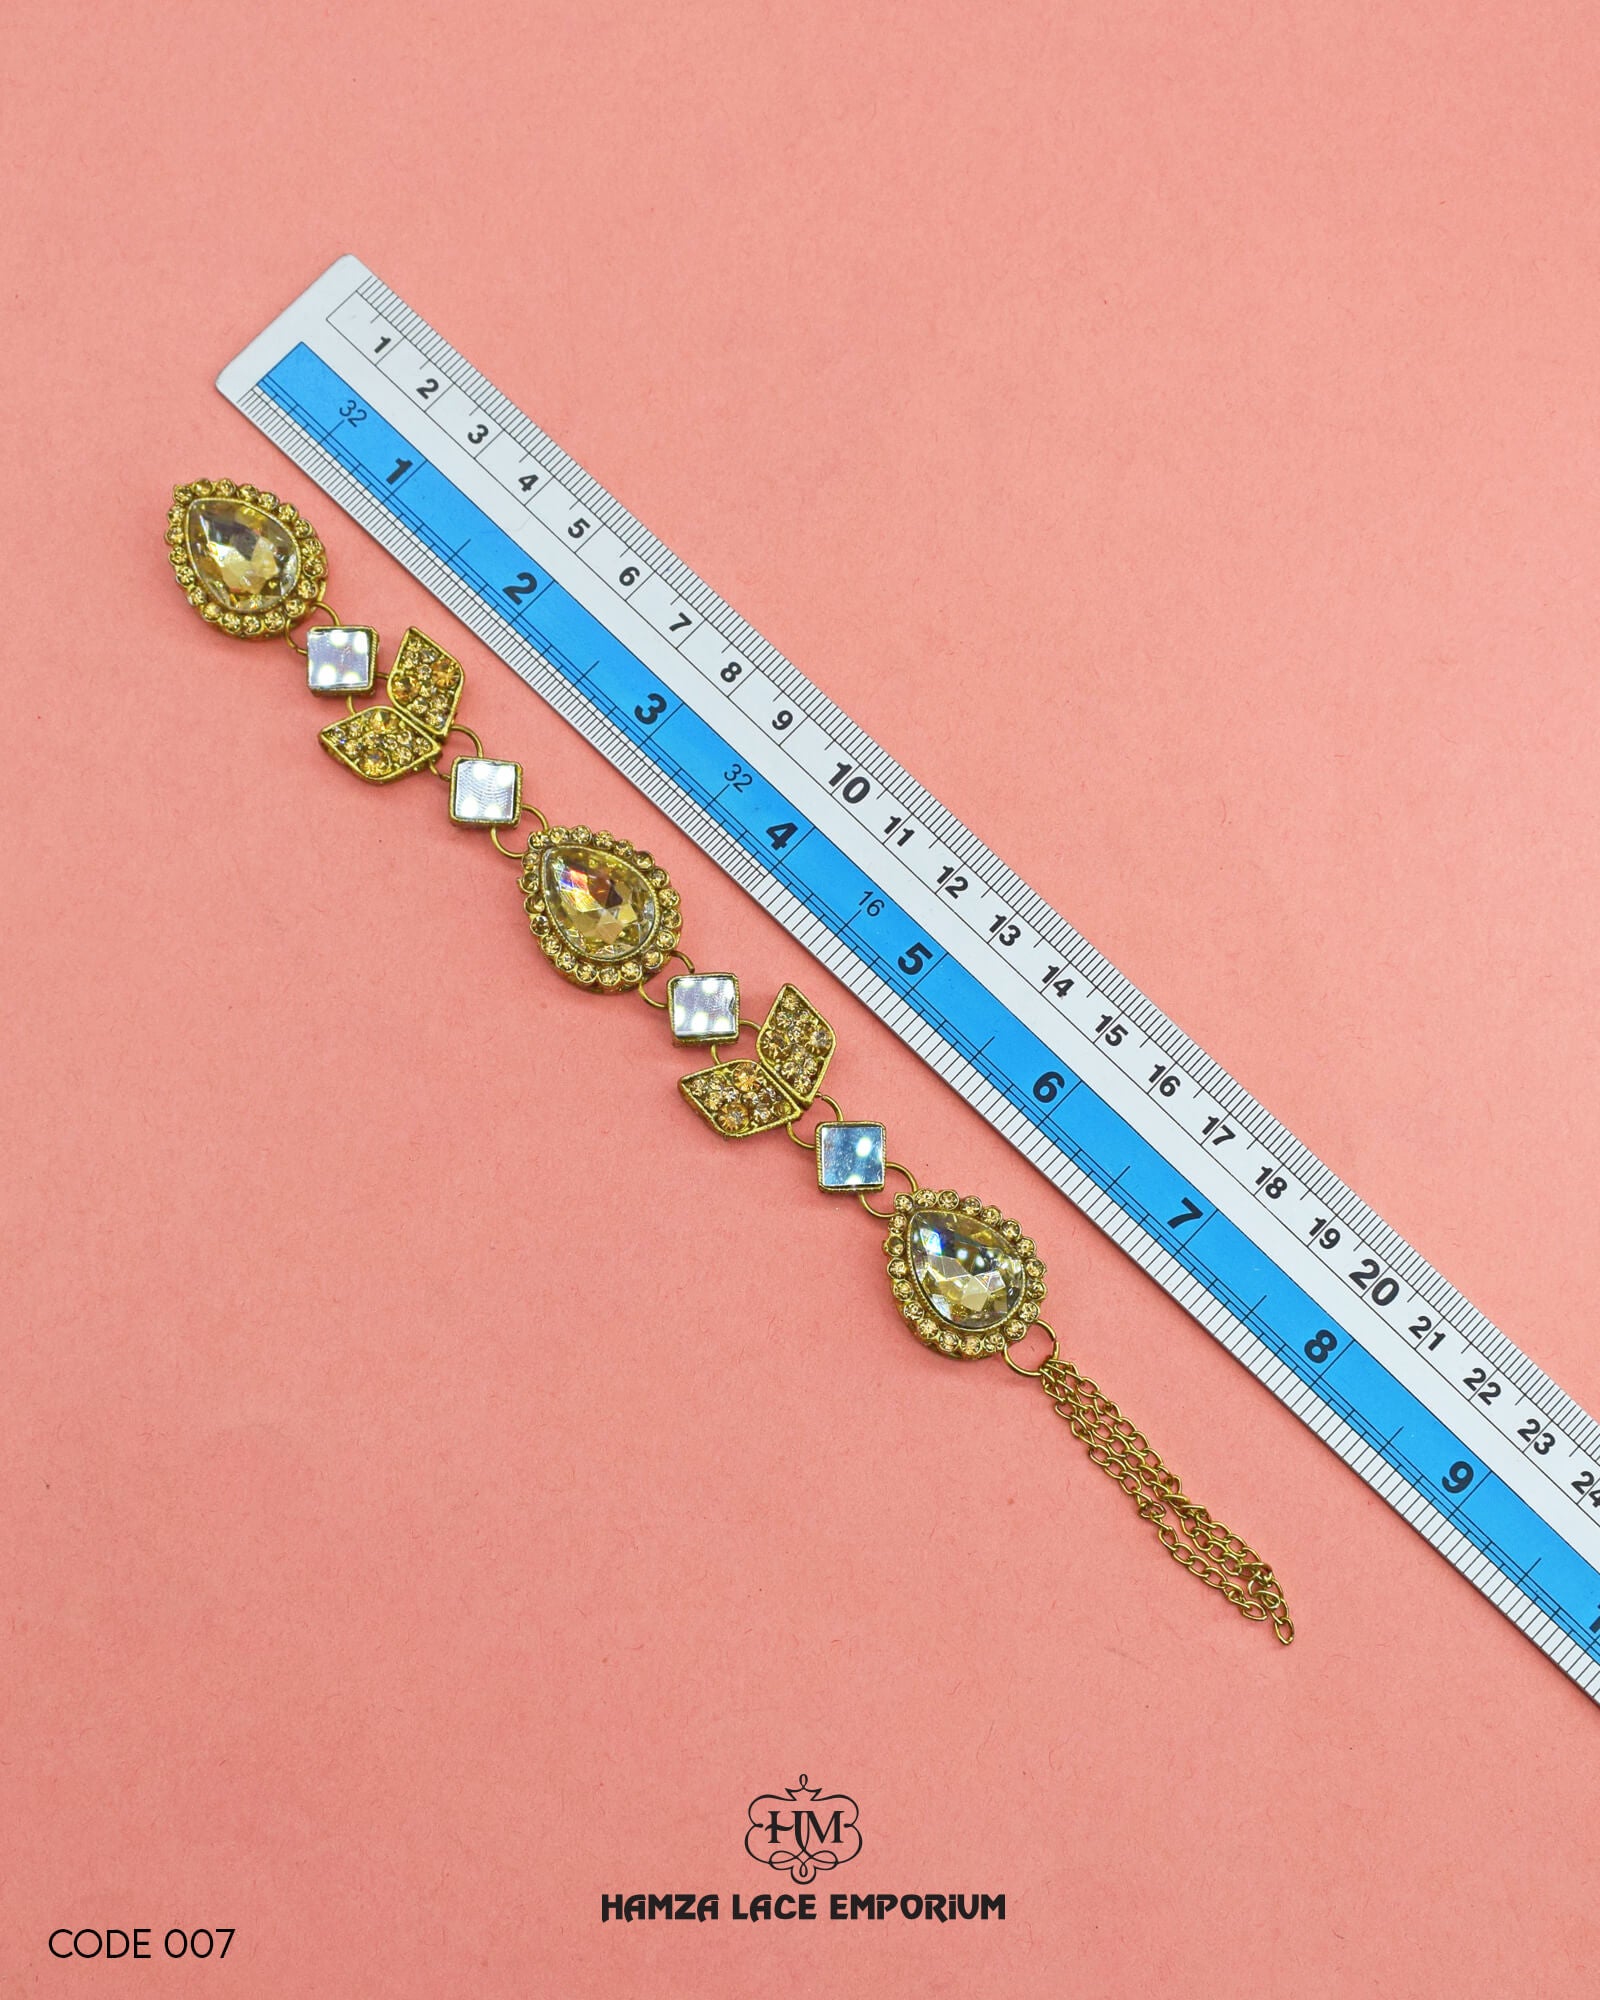 The 'Button Patti 007' size is showcased using a ruler for precise measurement.